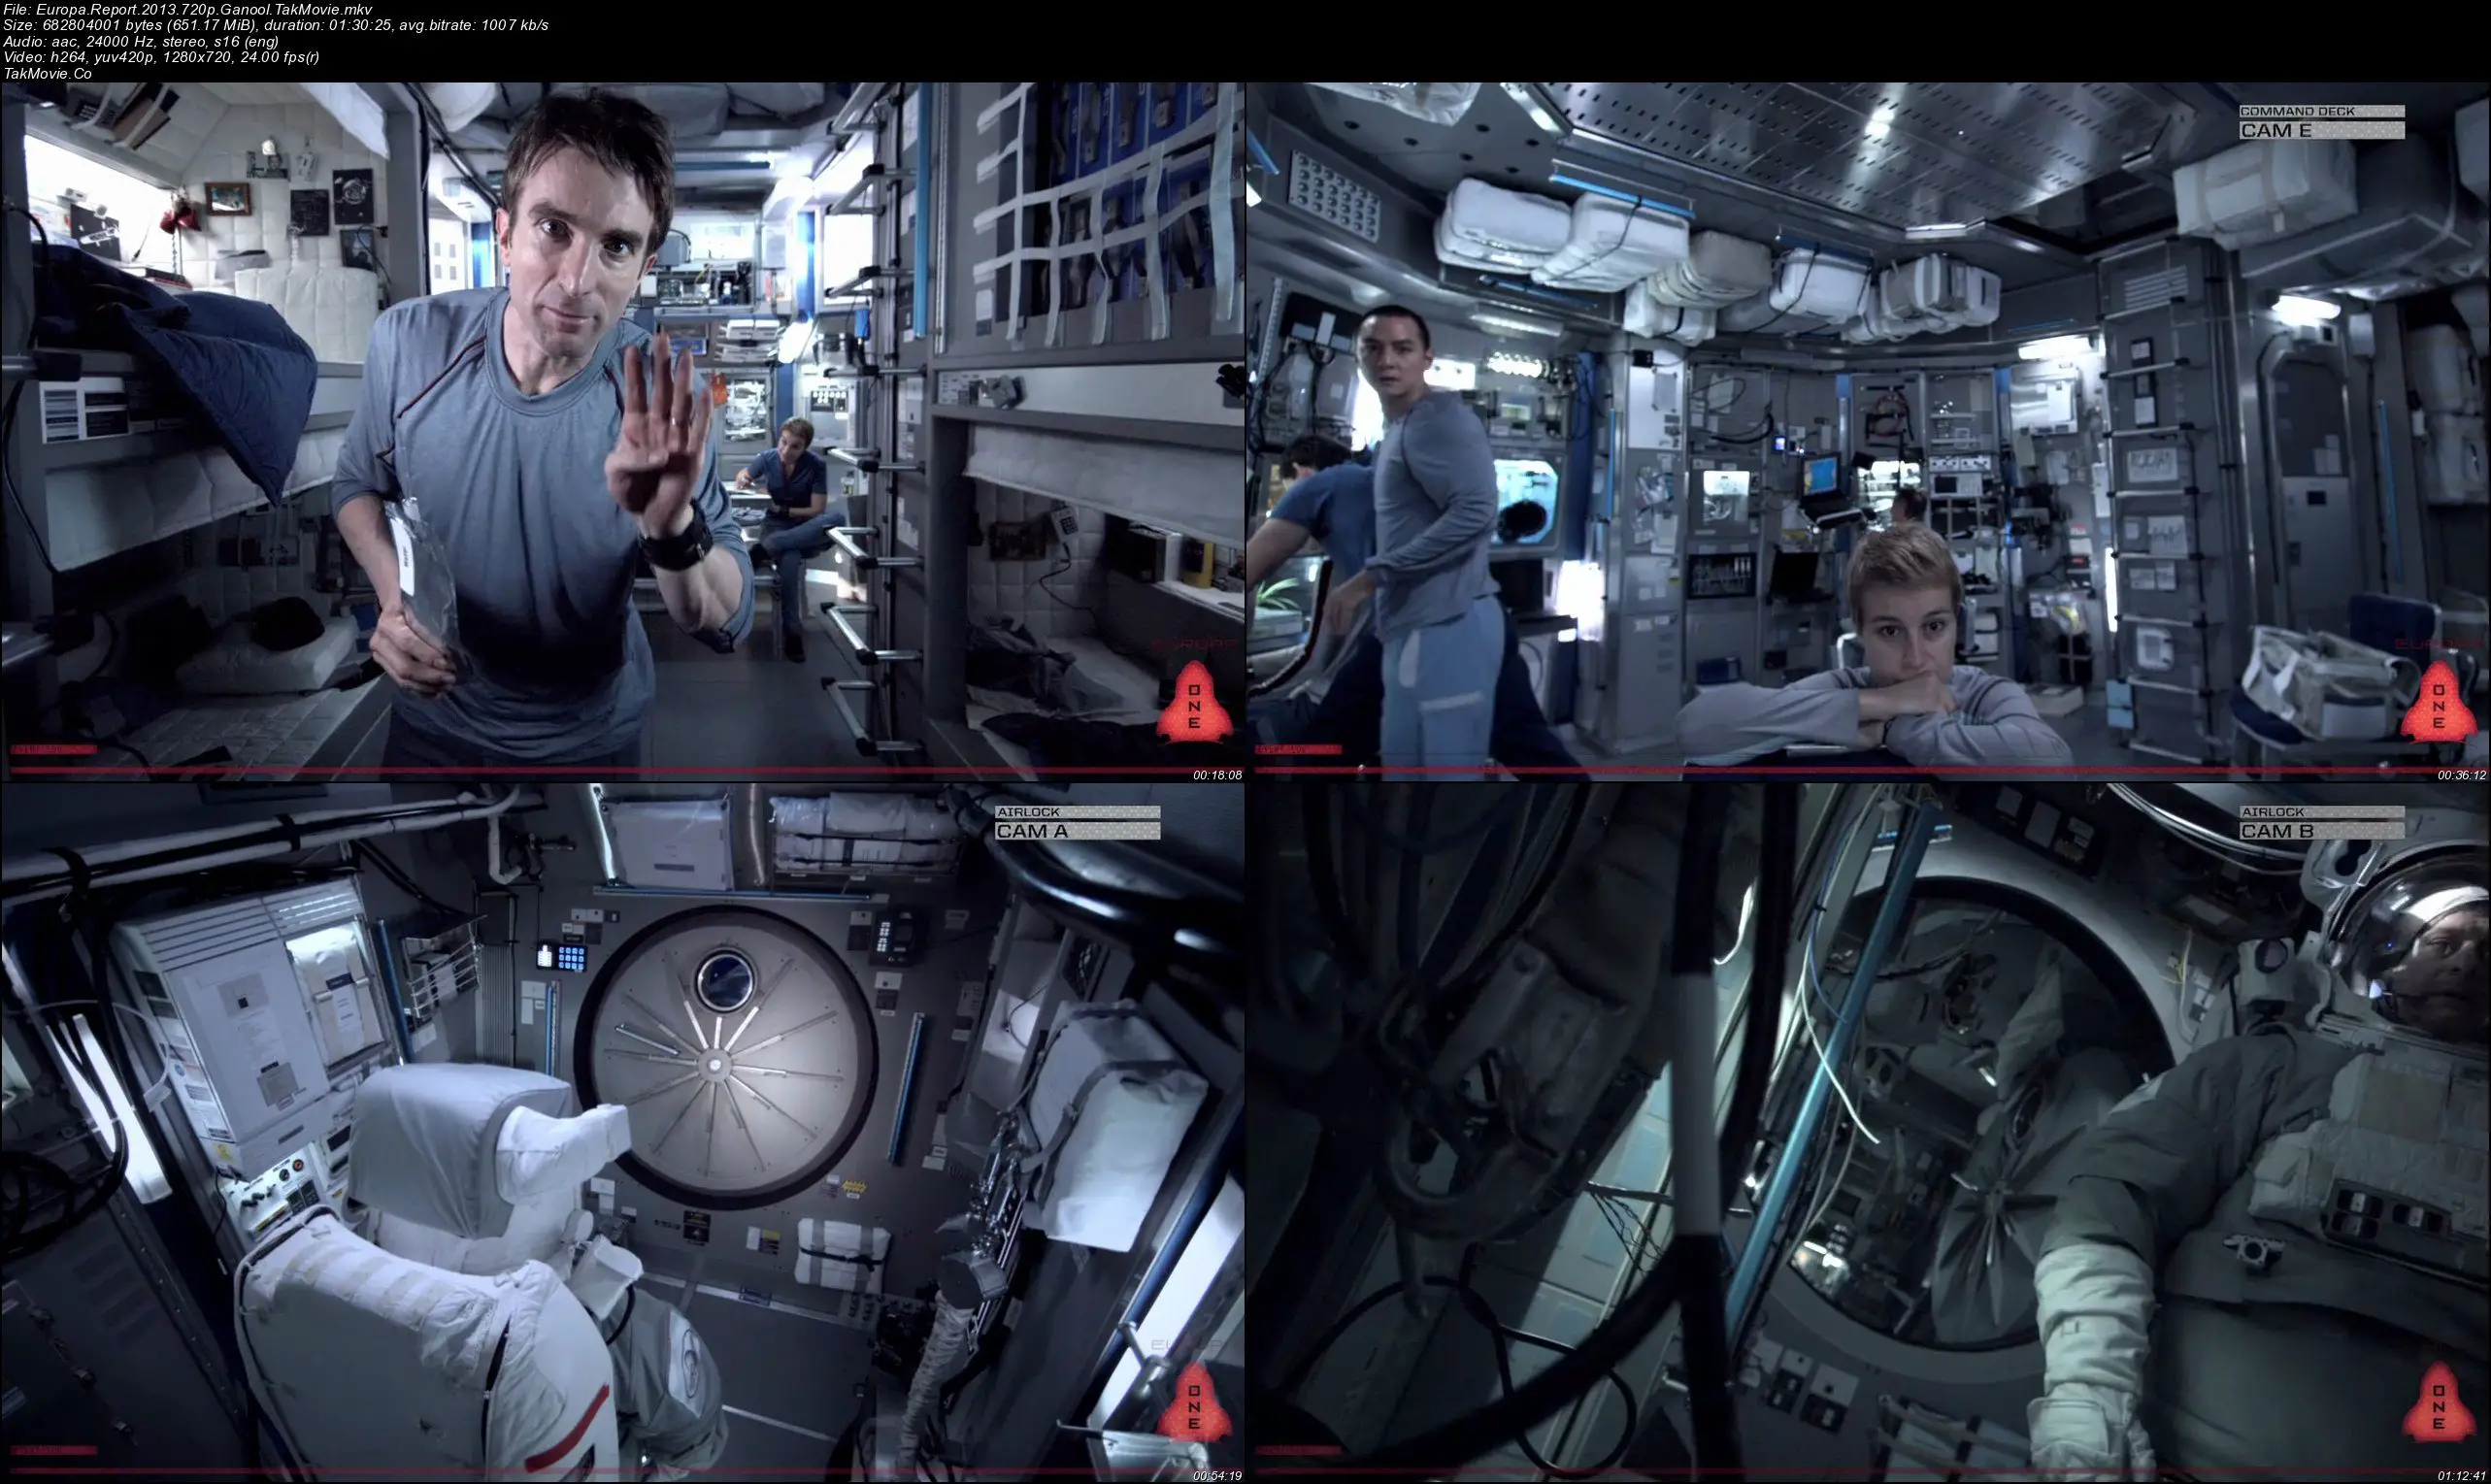 The split-screen and display margins given an authenticity layer to "Europa Report"